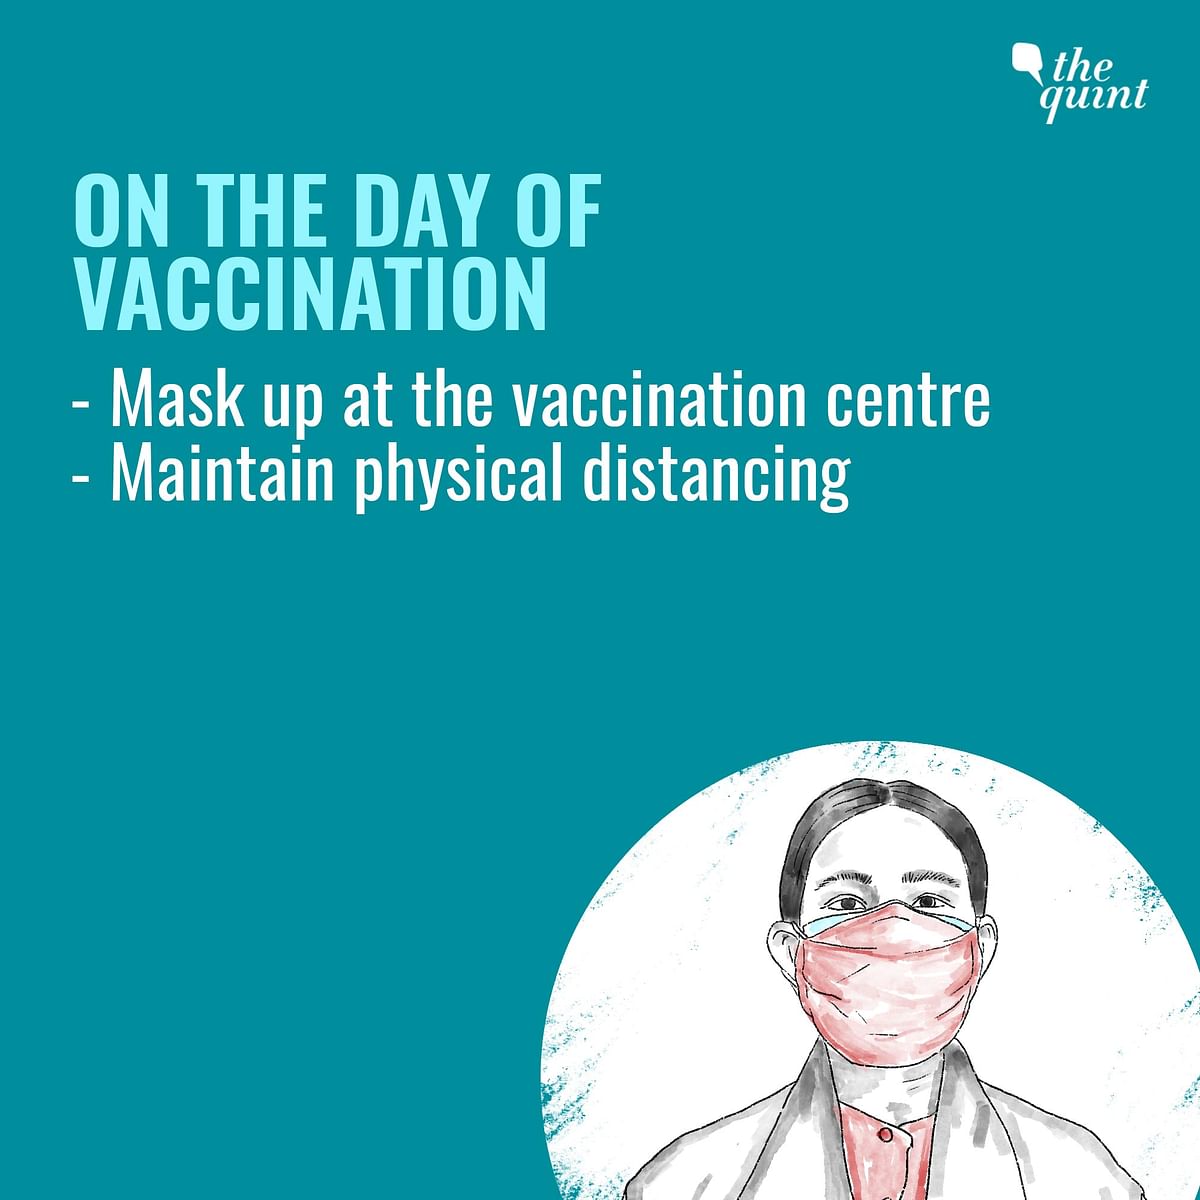 What medicines should you avoid on the day of vaccination? What documents do you need to carry? Read on to know.